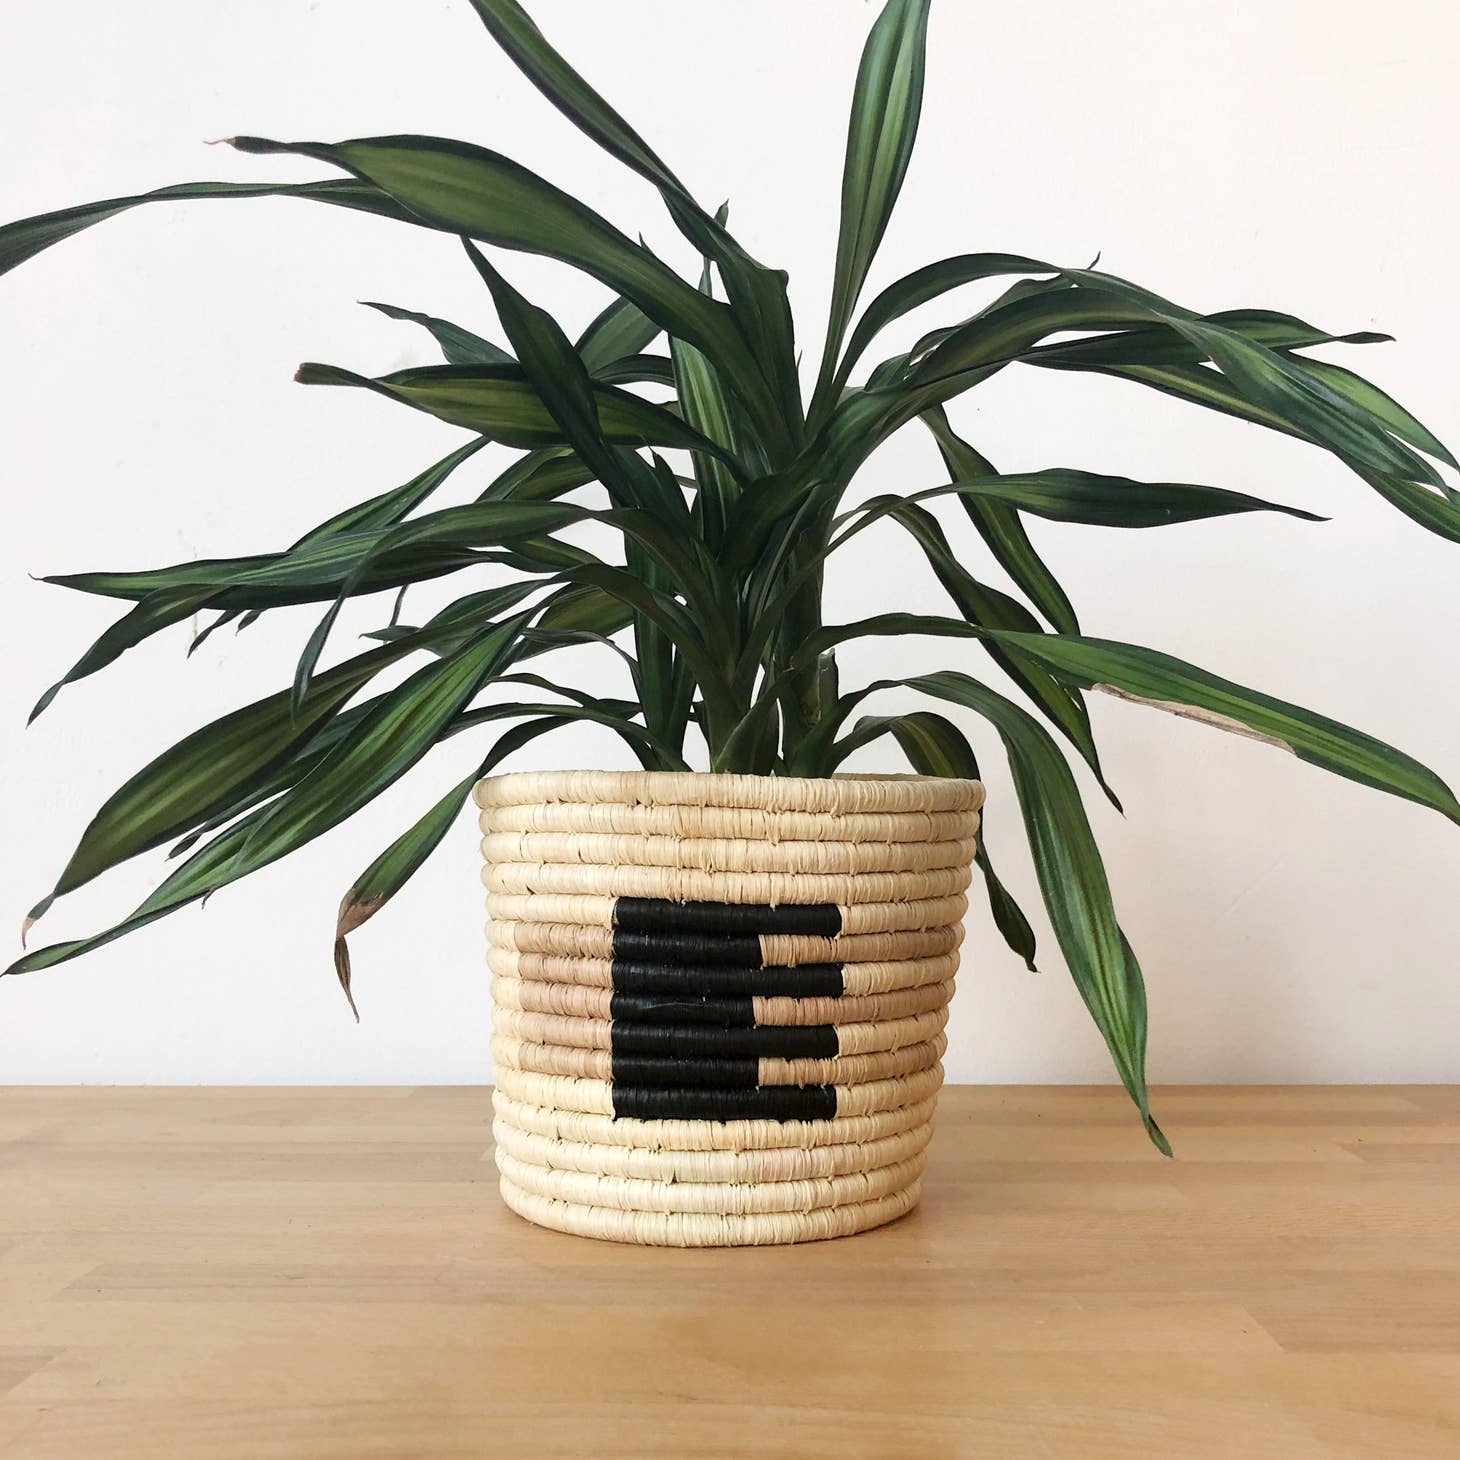 Structured Basket Planters by Amsha